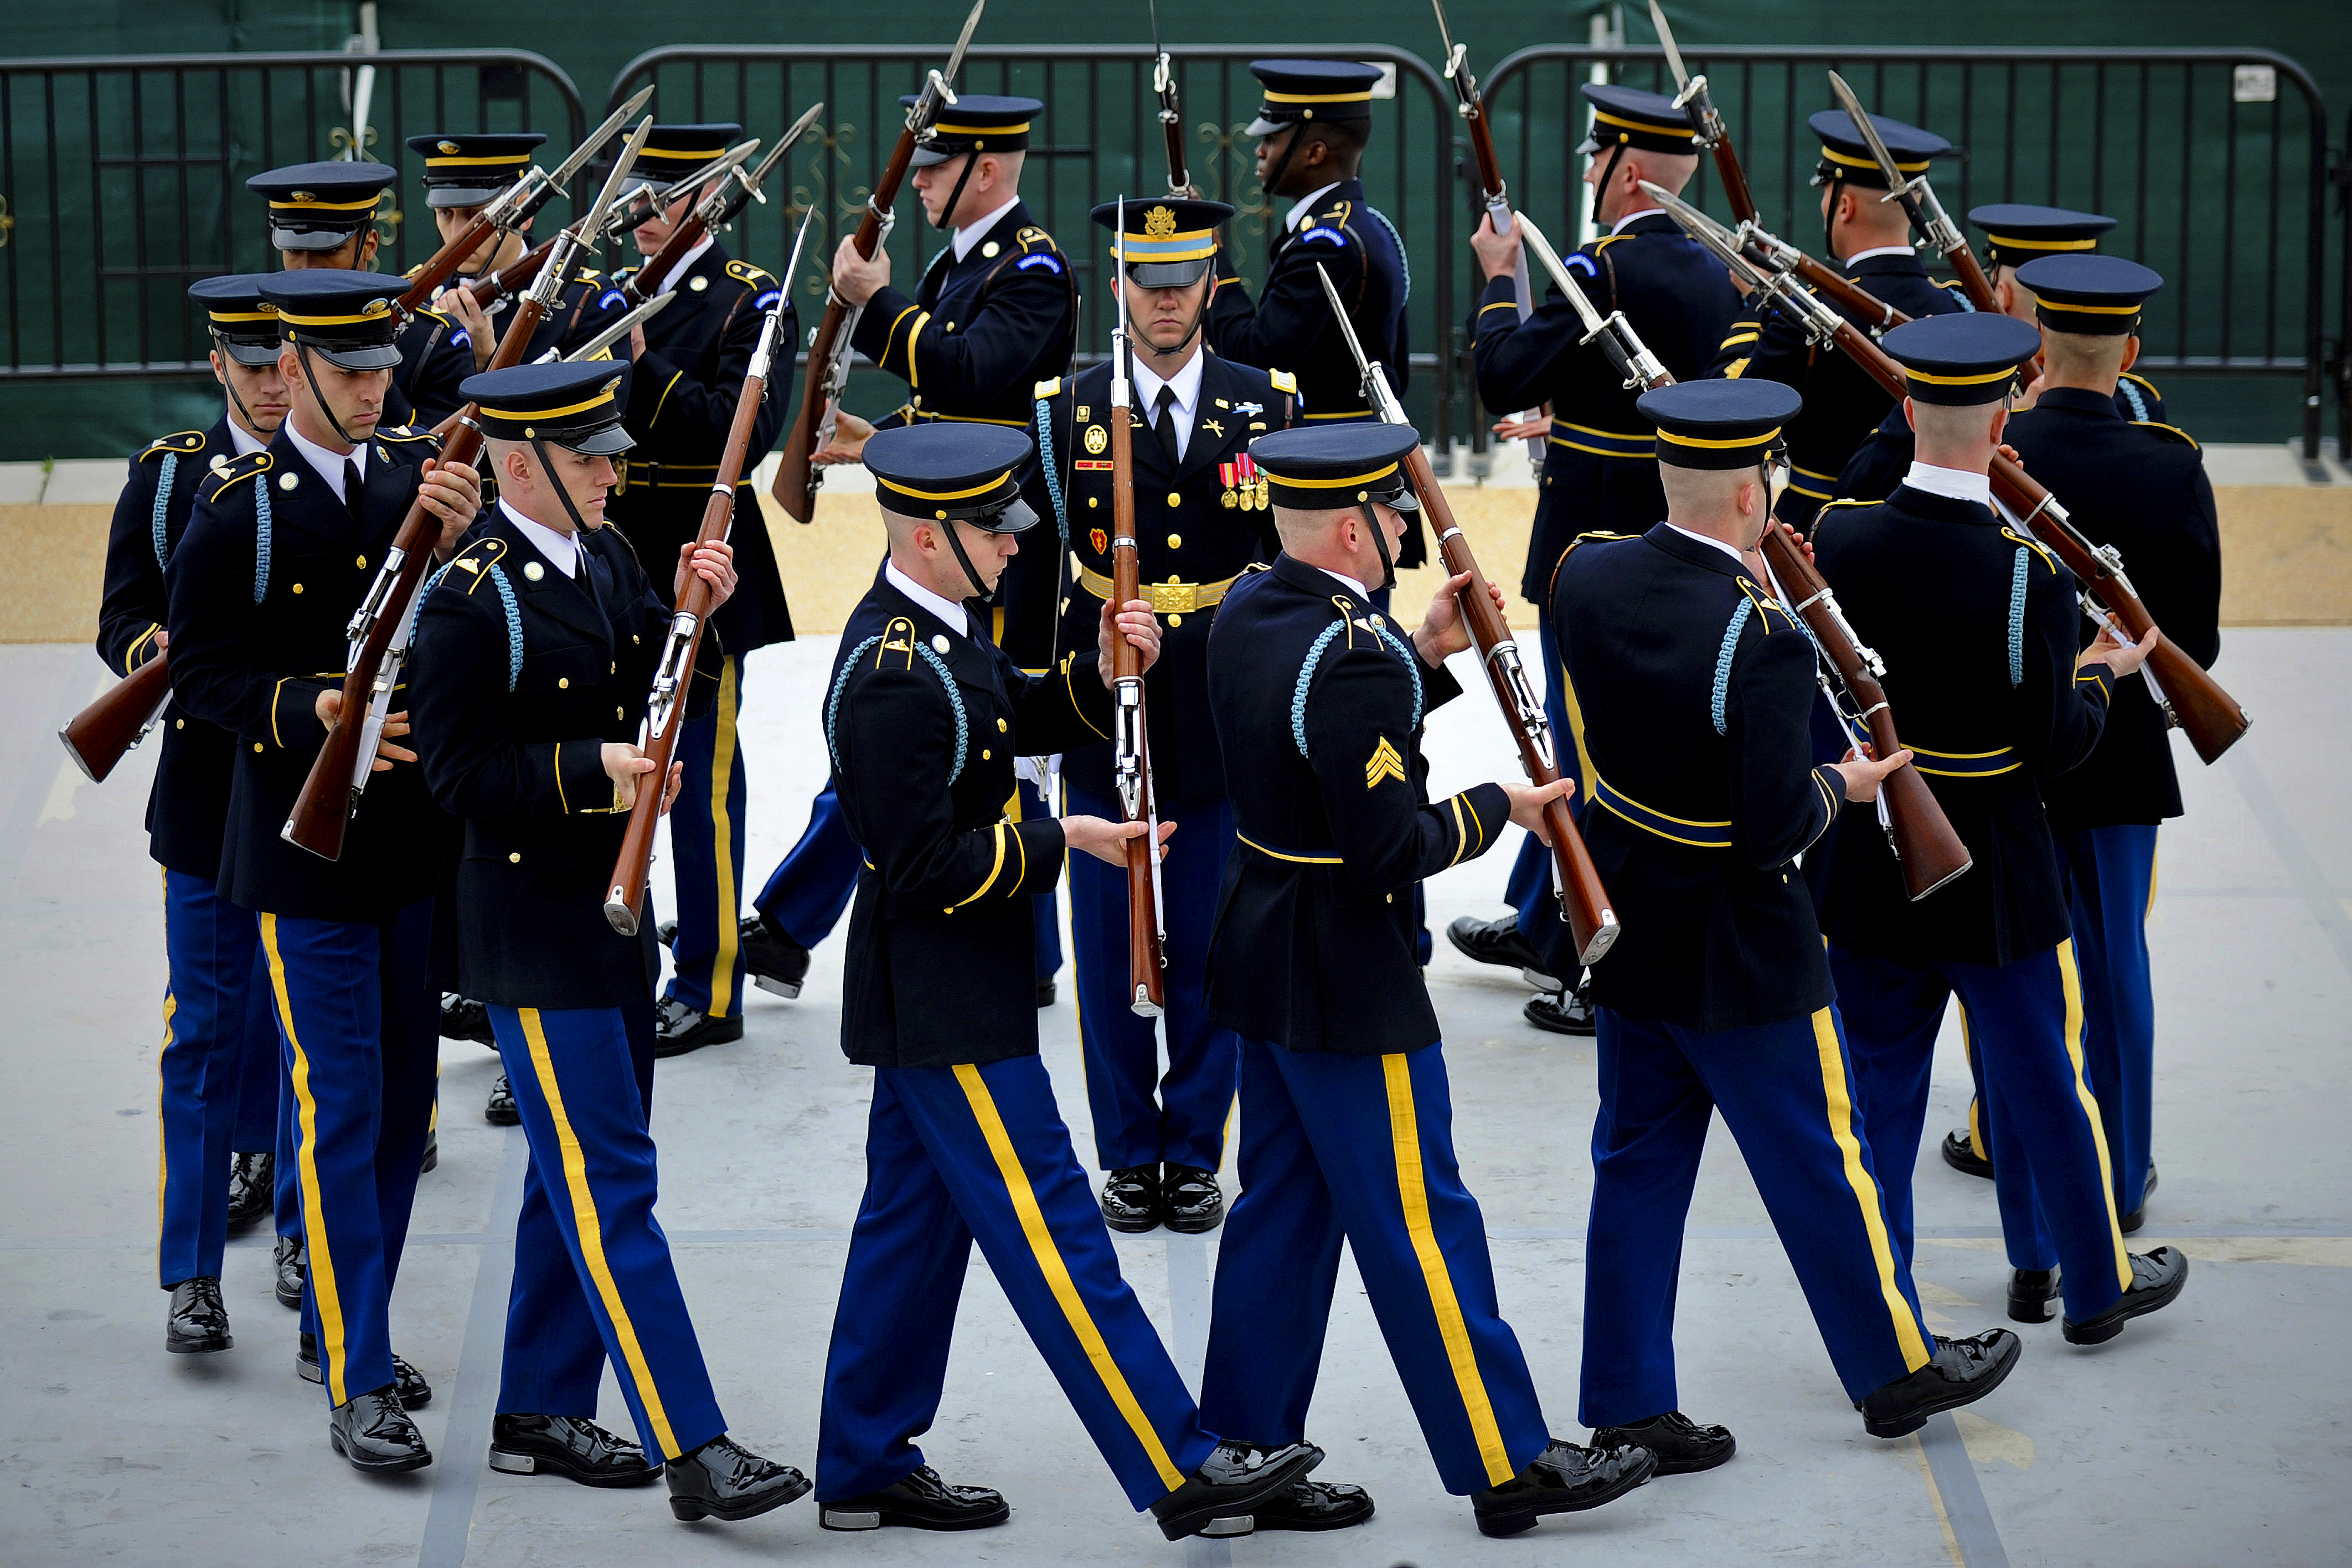 Oldest Active-Duty Infantry Unit in U.S. Army, Old Guard 